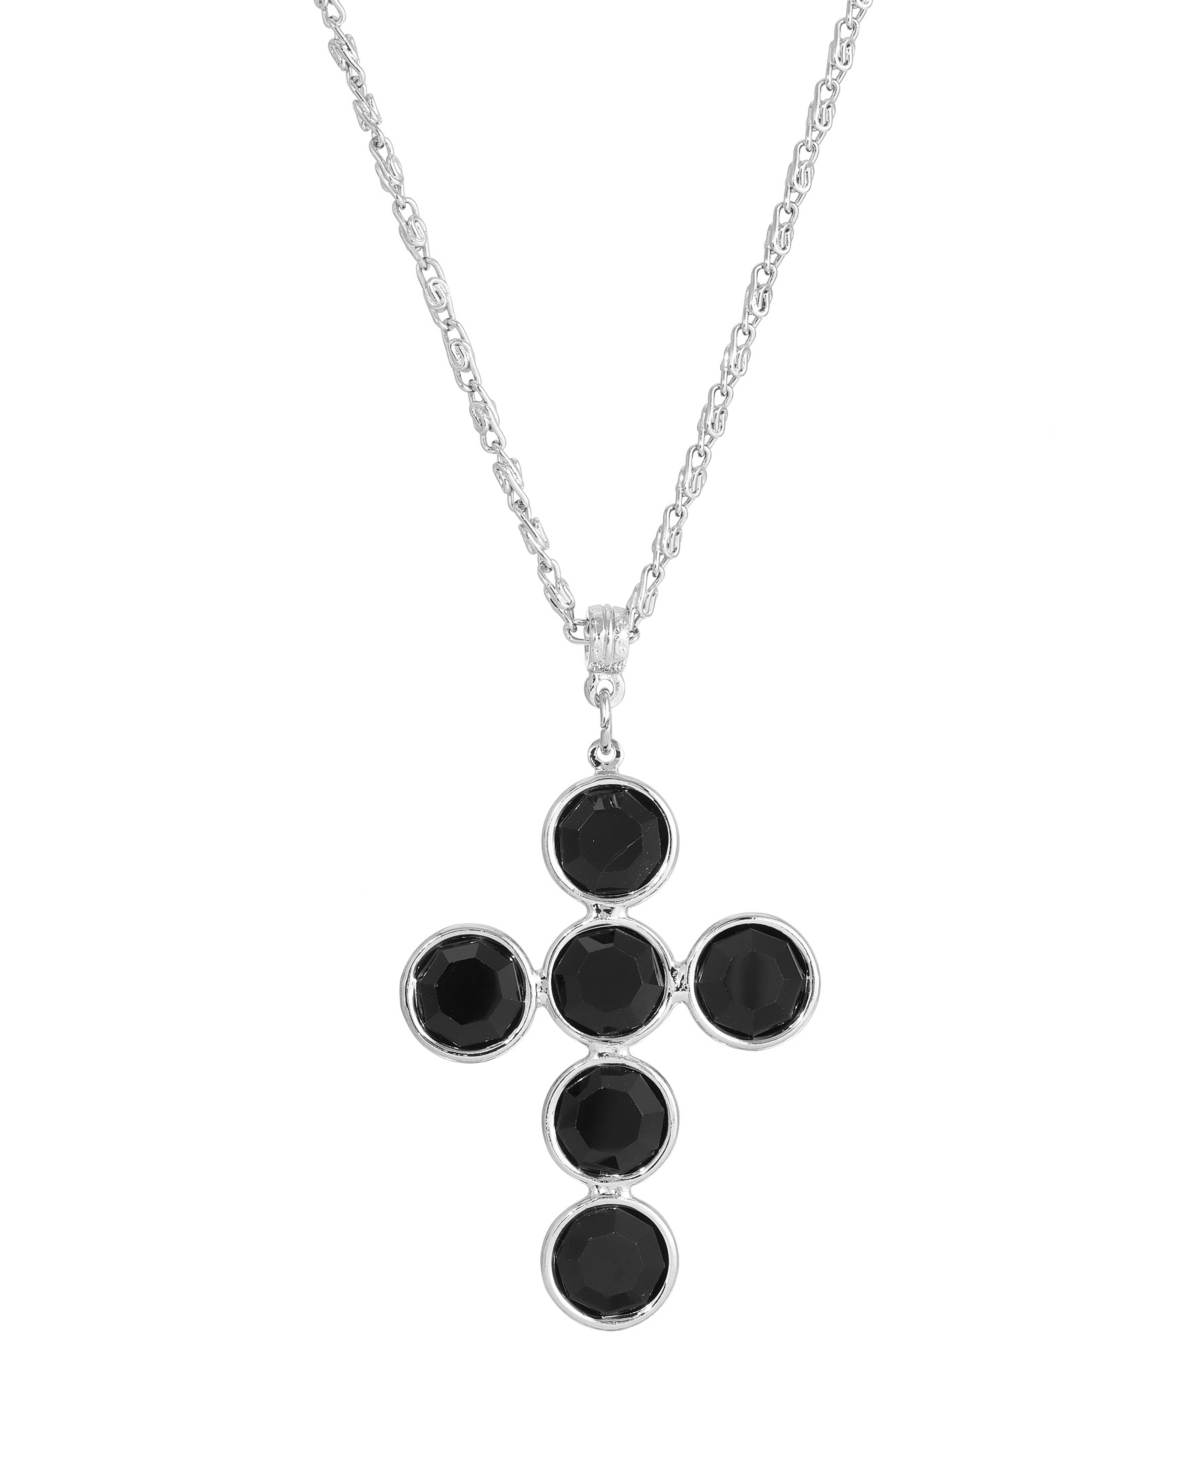 2028 Silver-tone Black Crystal Cross Chain Necklace